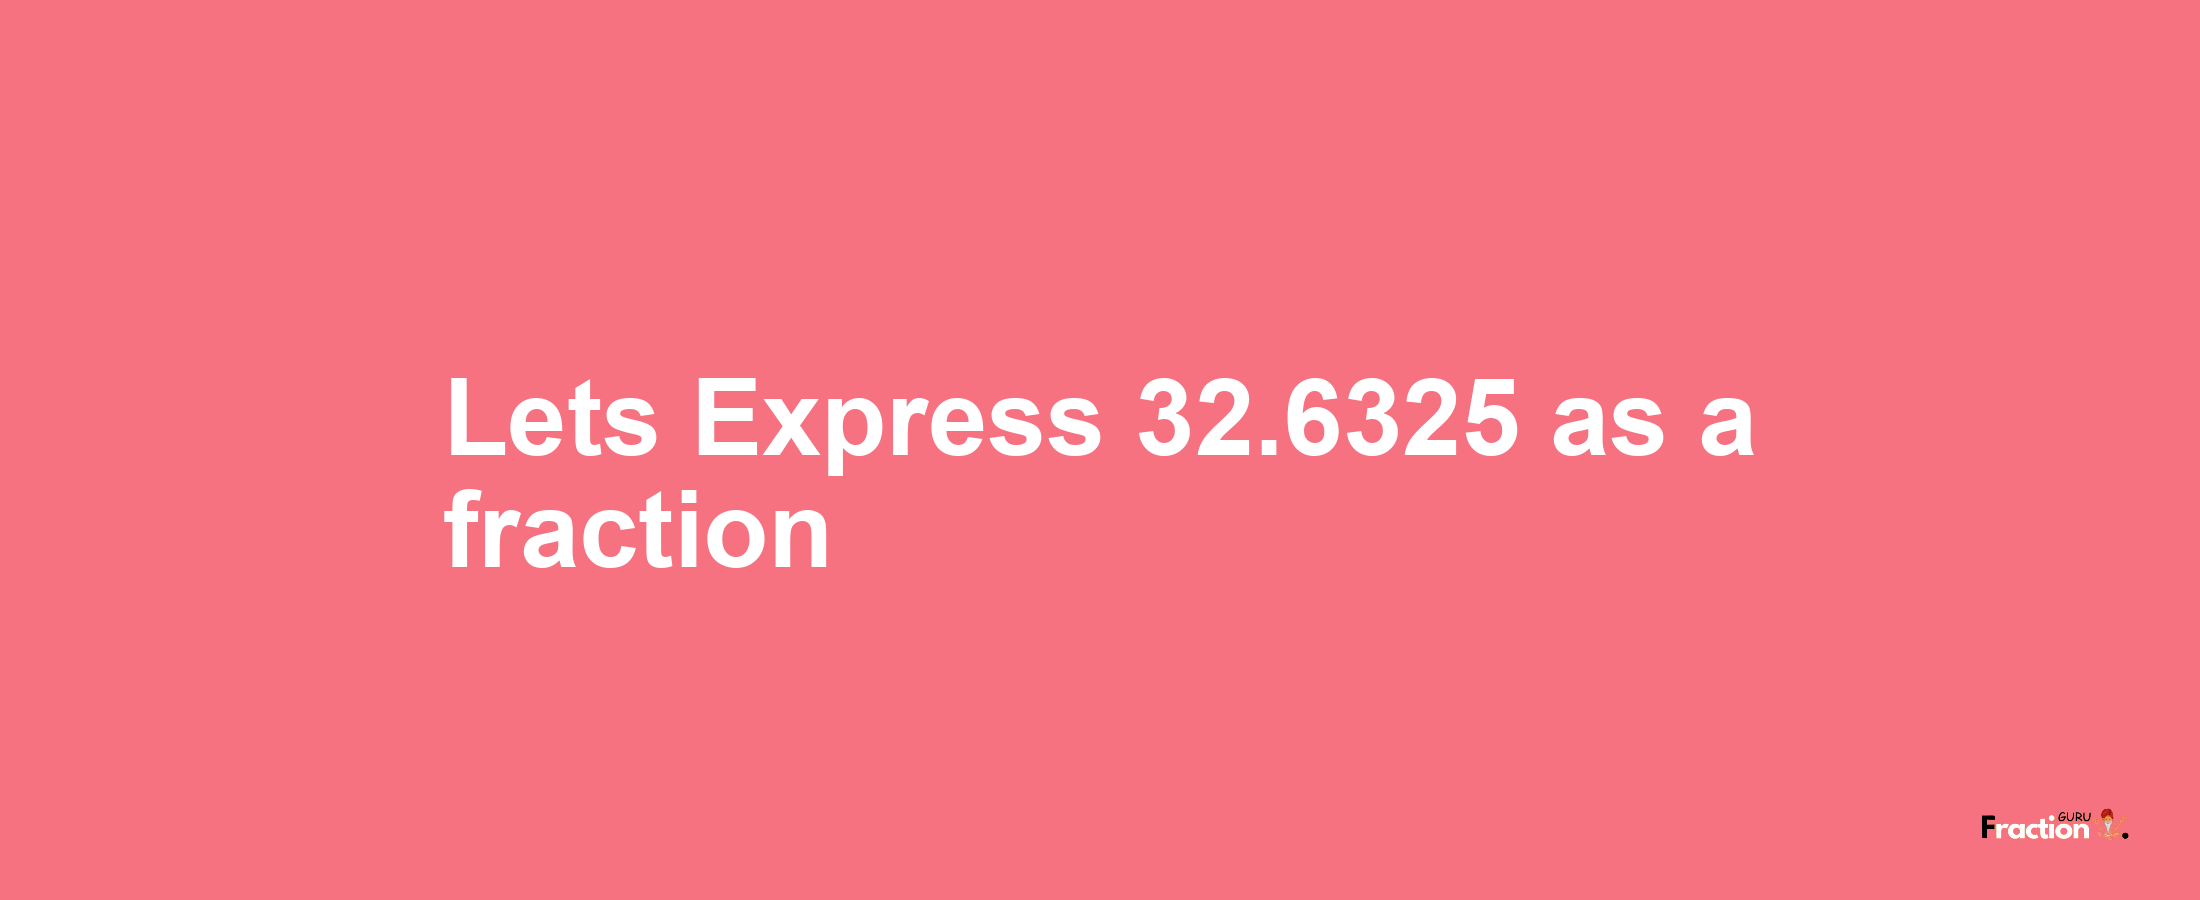 Lets Express 32.6325 as afraction